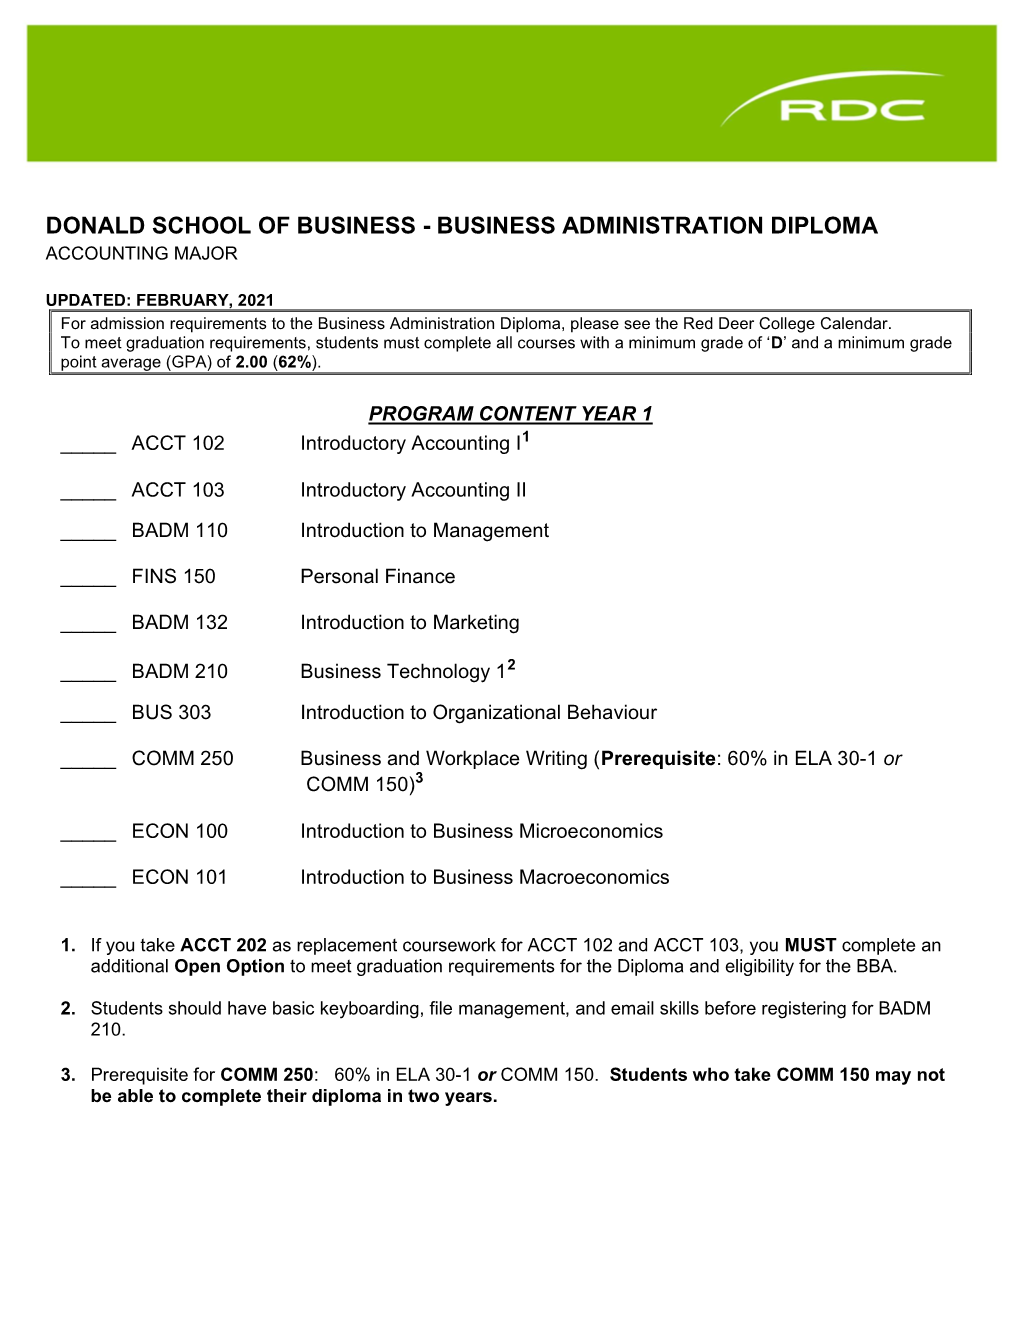 Donald School of Business - Business Administration Diploma Accounting Major